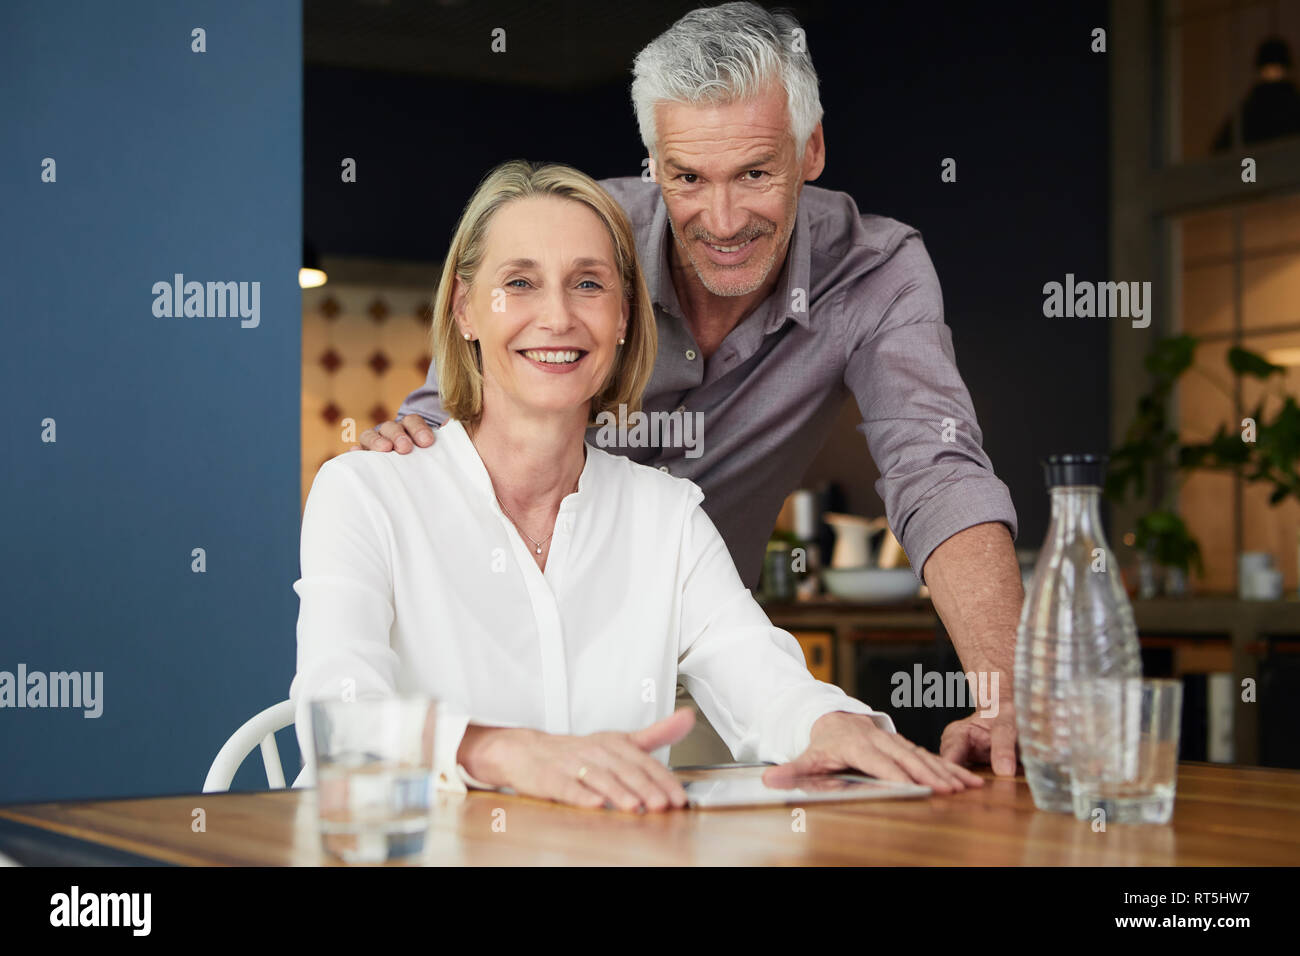 Portrait of smiling mature couple at home Stock Photo